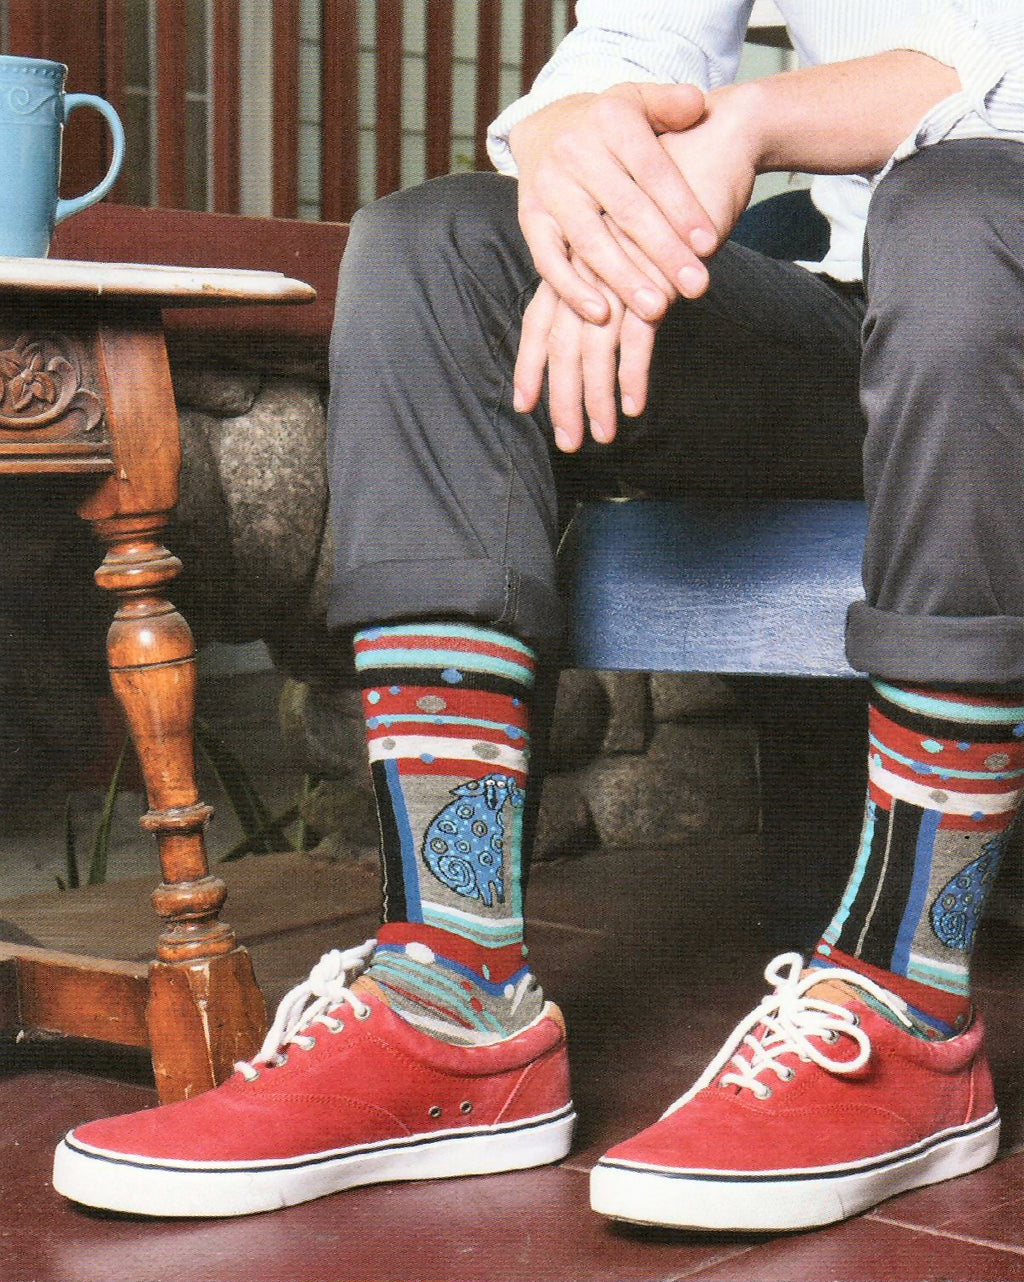 A Model is wearing Mens Laurel Burch Matisse Dog Sock is a Portrait of a Dog in Blues and Greys. In a unique style to favor the Painter Matisse. The socks look great with the Red shoes and Grey pants!